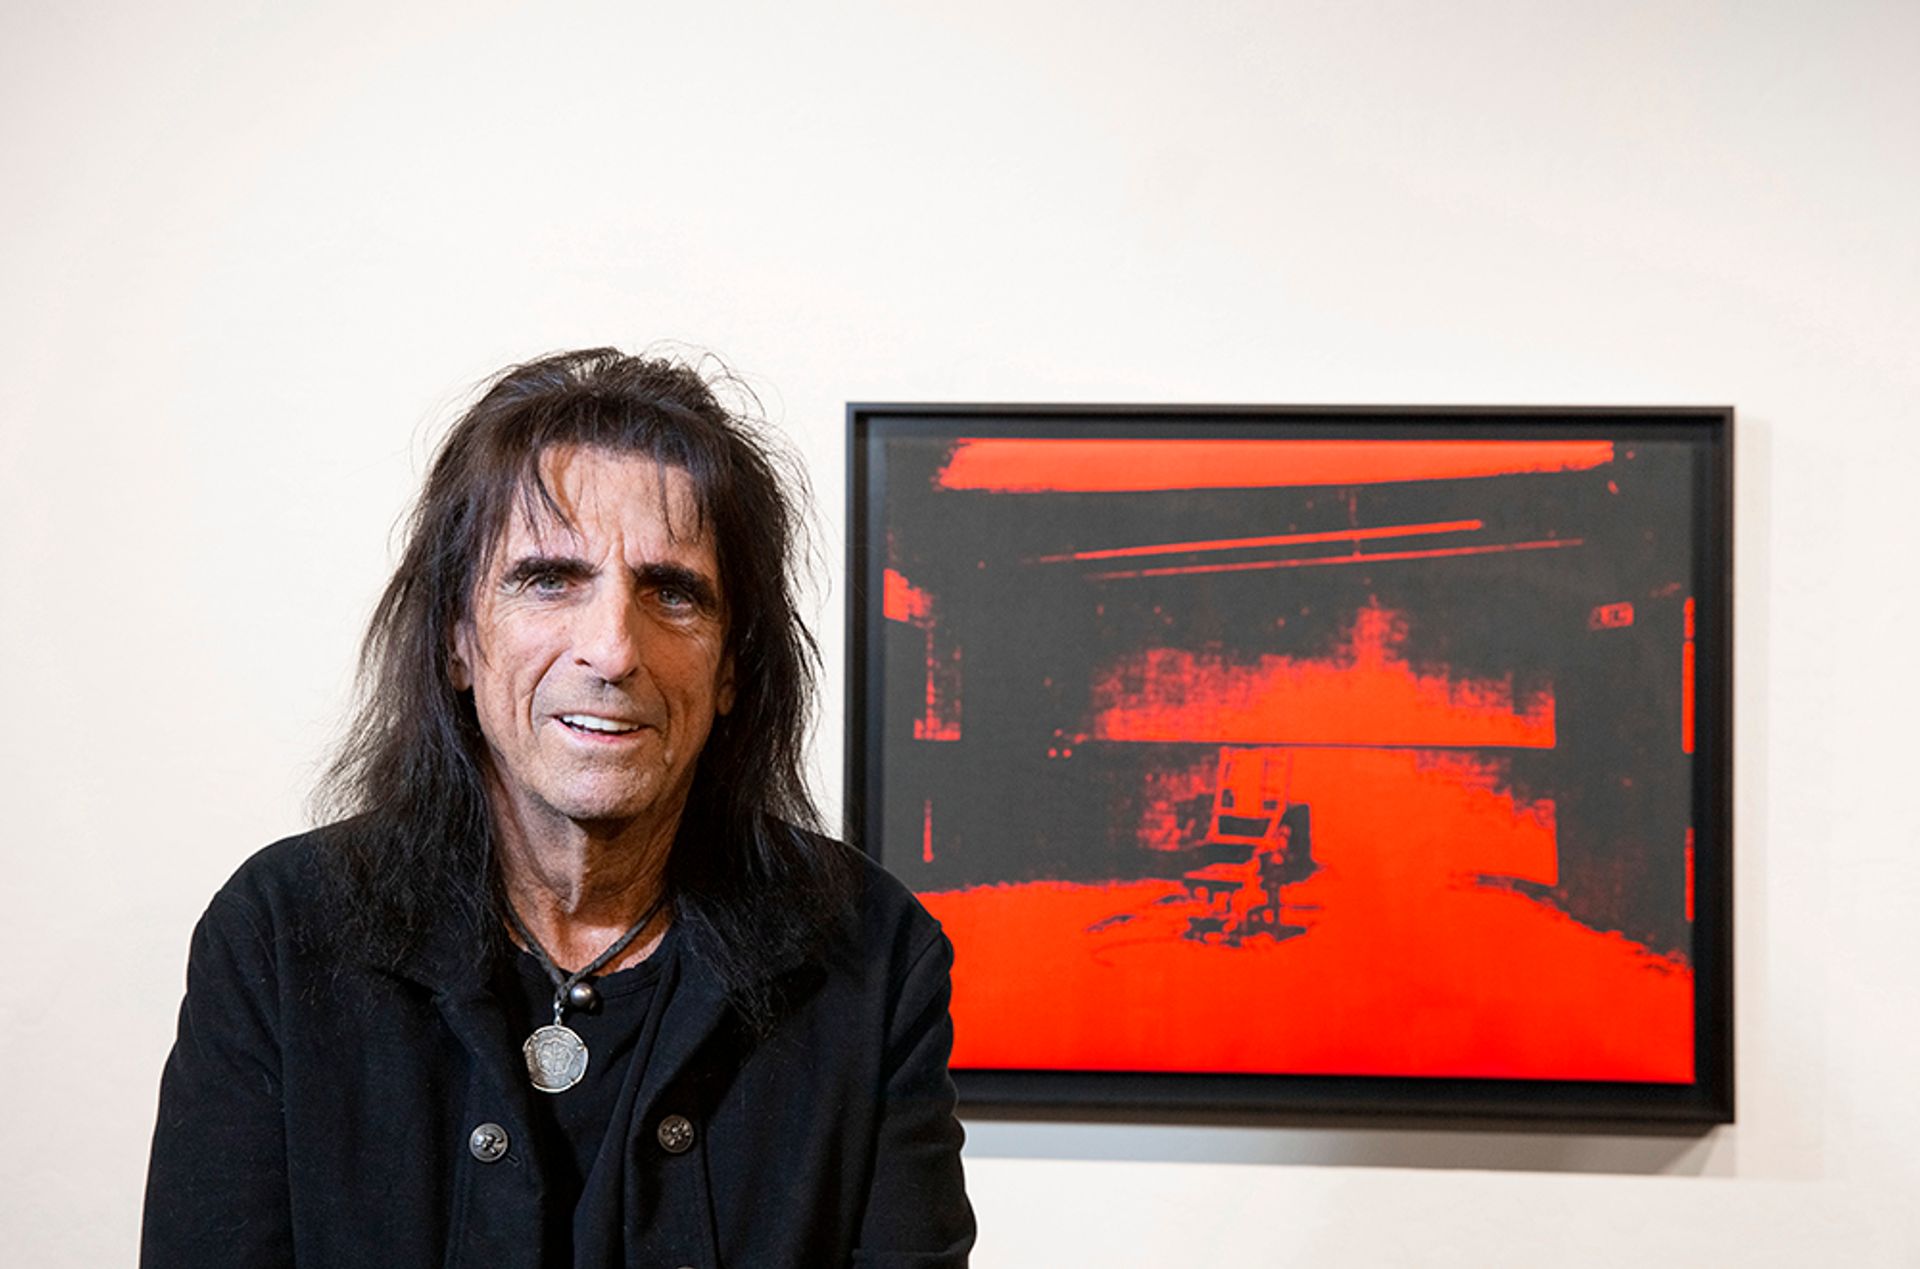 Alice Cooper with his rediscovered Warhol

Photo: Chris Loomis/© 2021 The Andy Warhol Foundation for the Visual Arts, Inc. Licensed by Artists Rights Society (ARS), New York